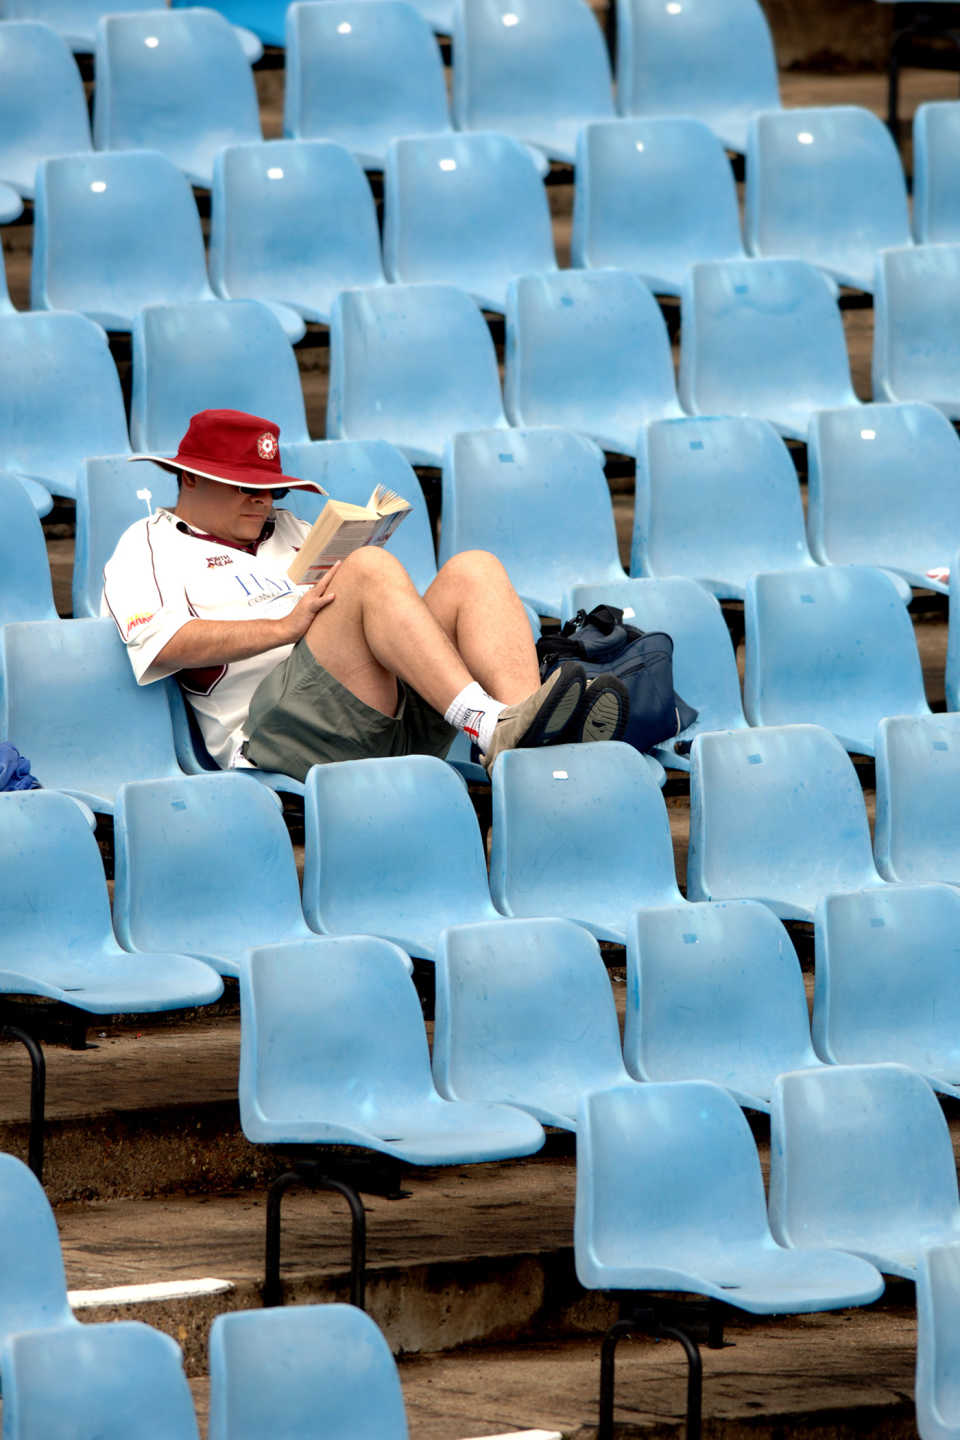 A fan reads in the stands, Northamptonshire v Leicestshire, day one, County Championship Division Two, Northampton, June 15, 2007